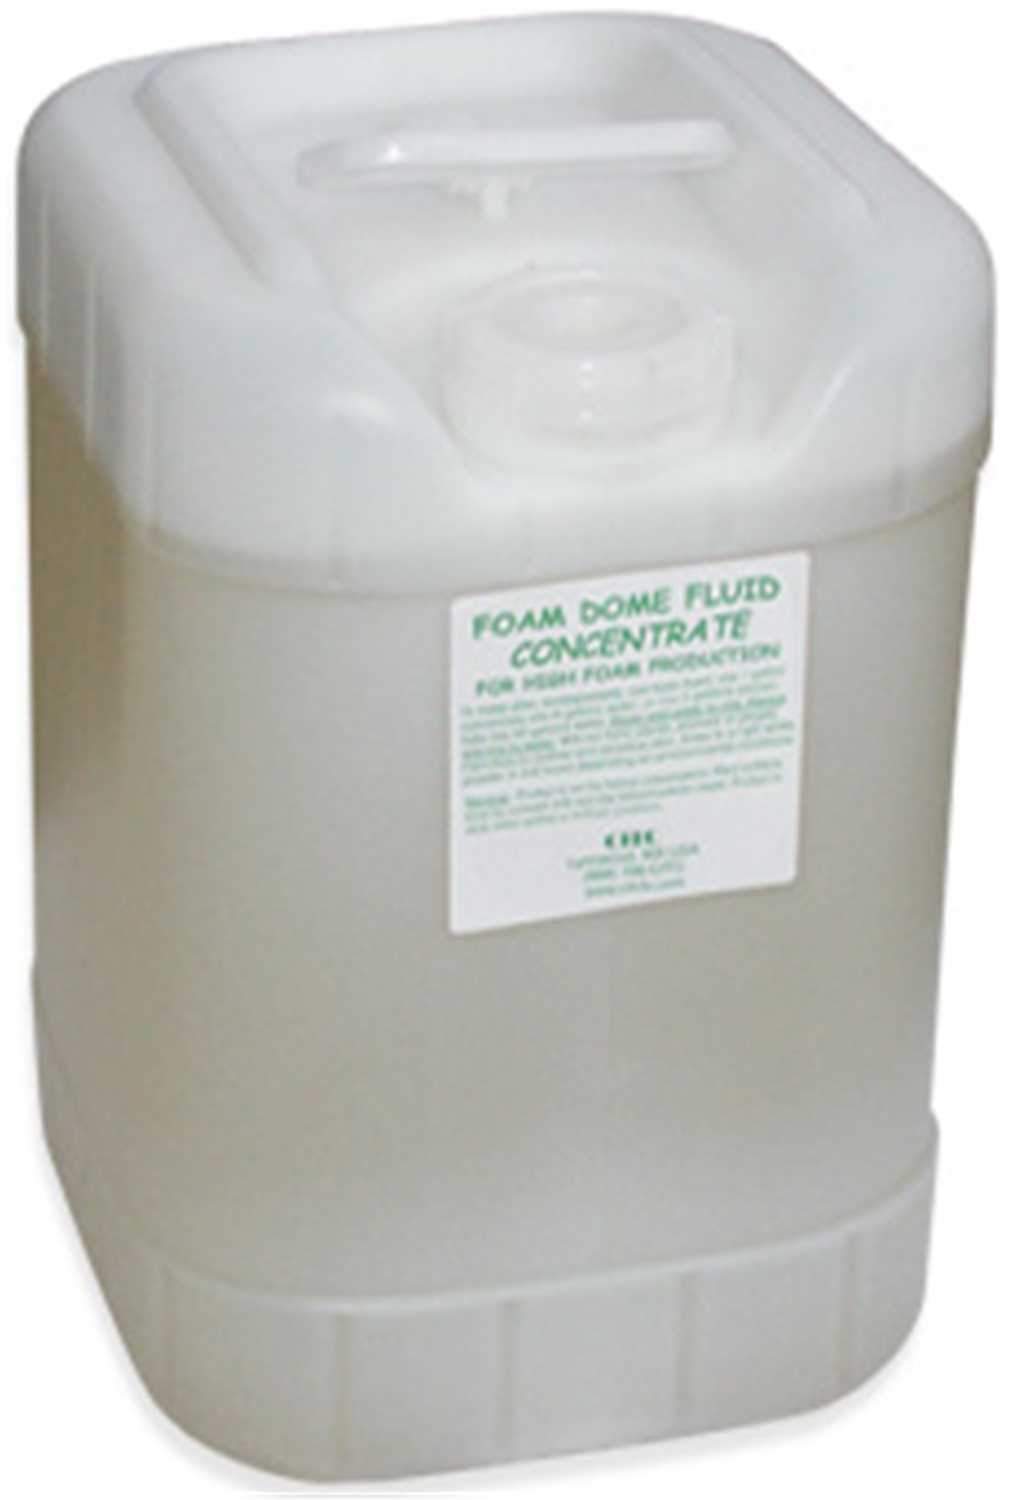 CITC Super Foam Fluid Concentrate 55 Gallon Drum - PSSL ProSound and Stage Lighting